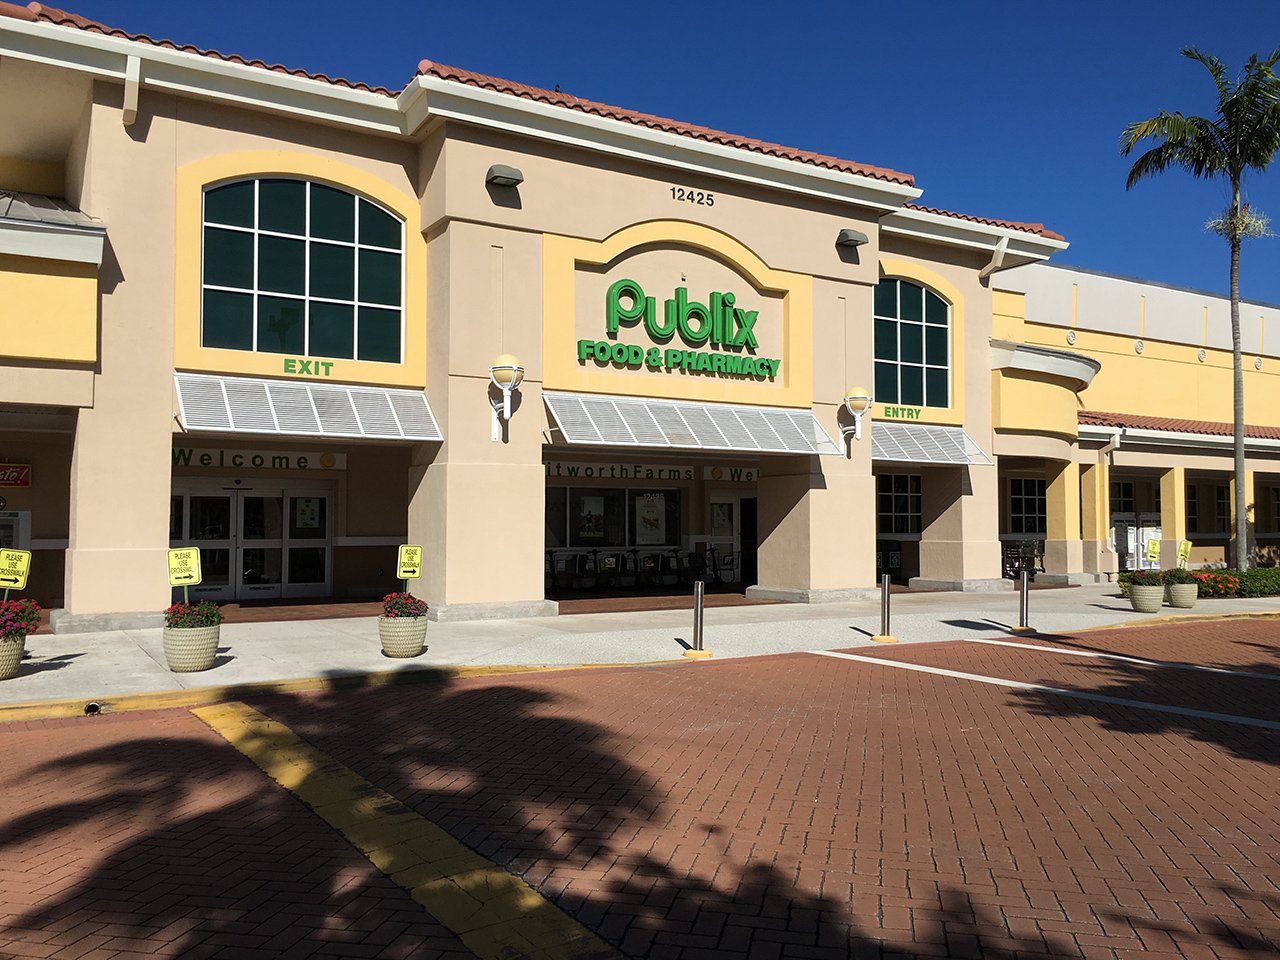 MMG and Global Acquire a Distressed 88,424 Square-Foot Publix-Anchored Center in Palm Beach County, FL